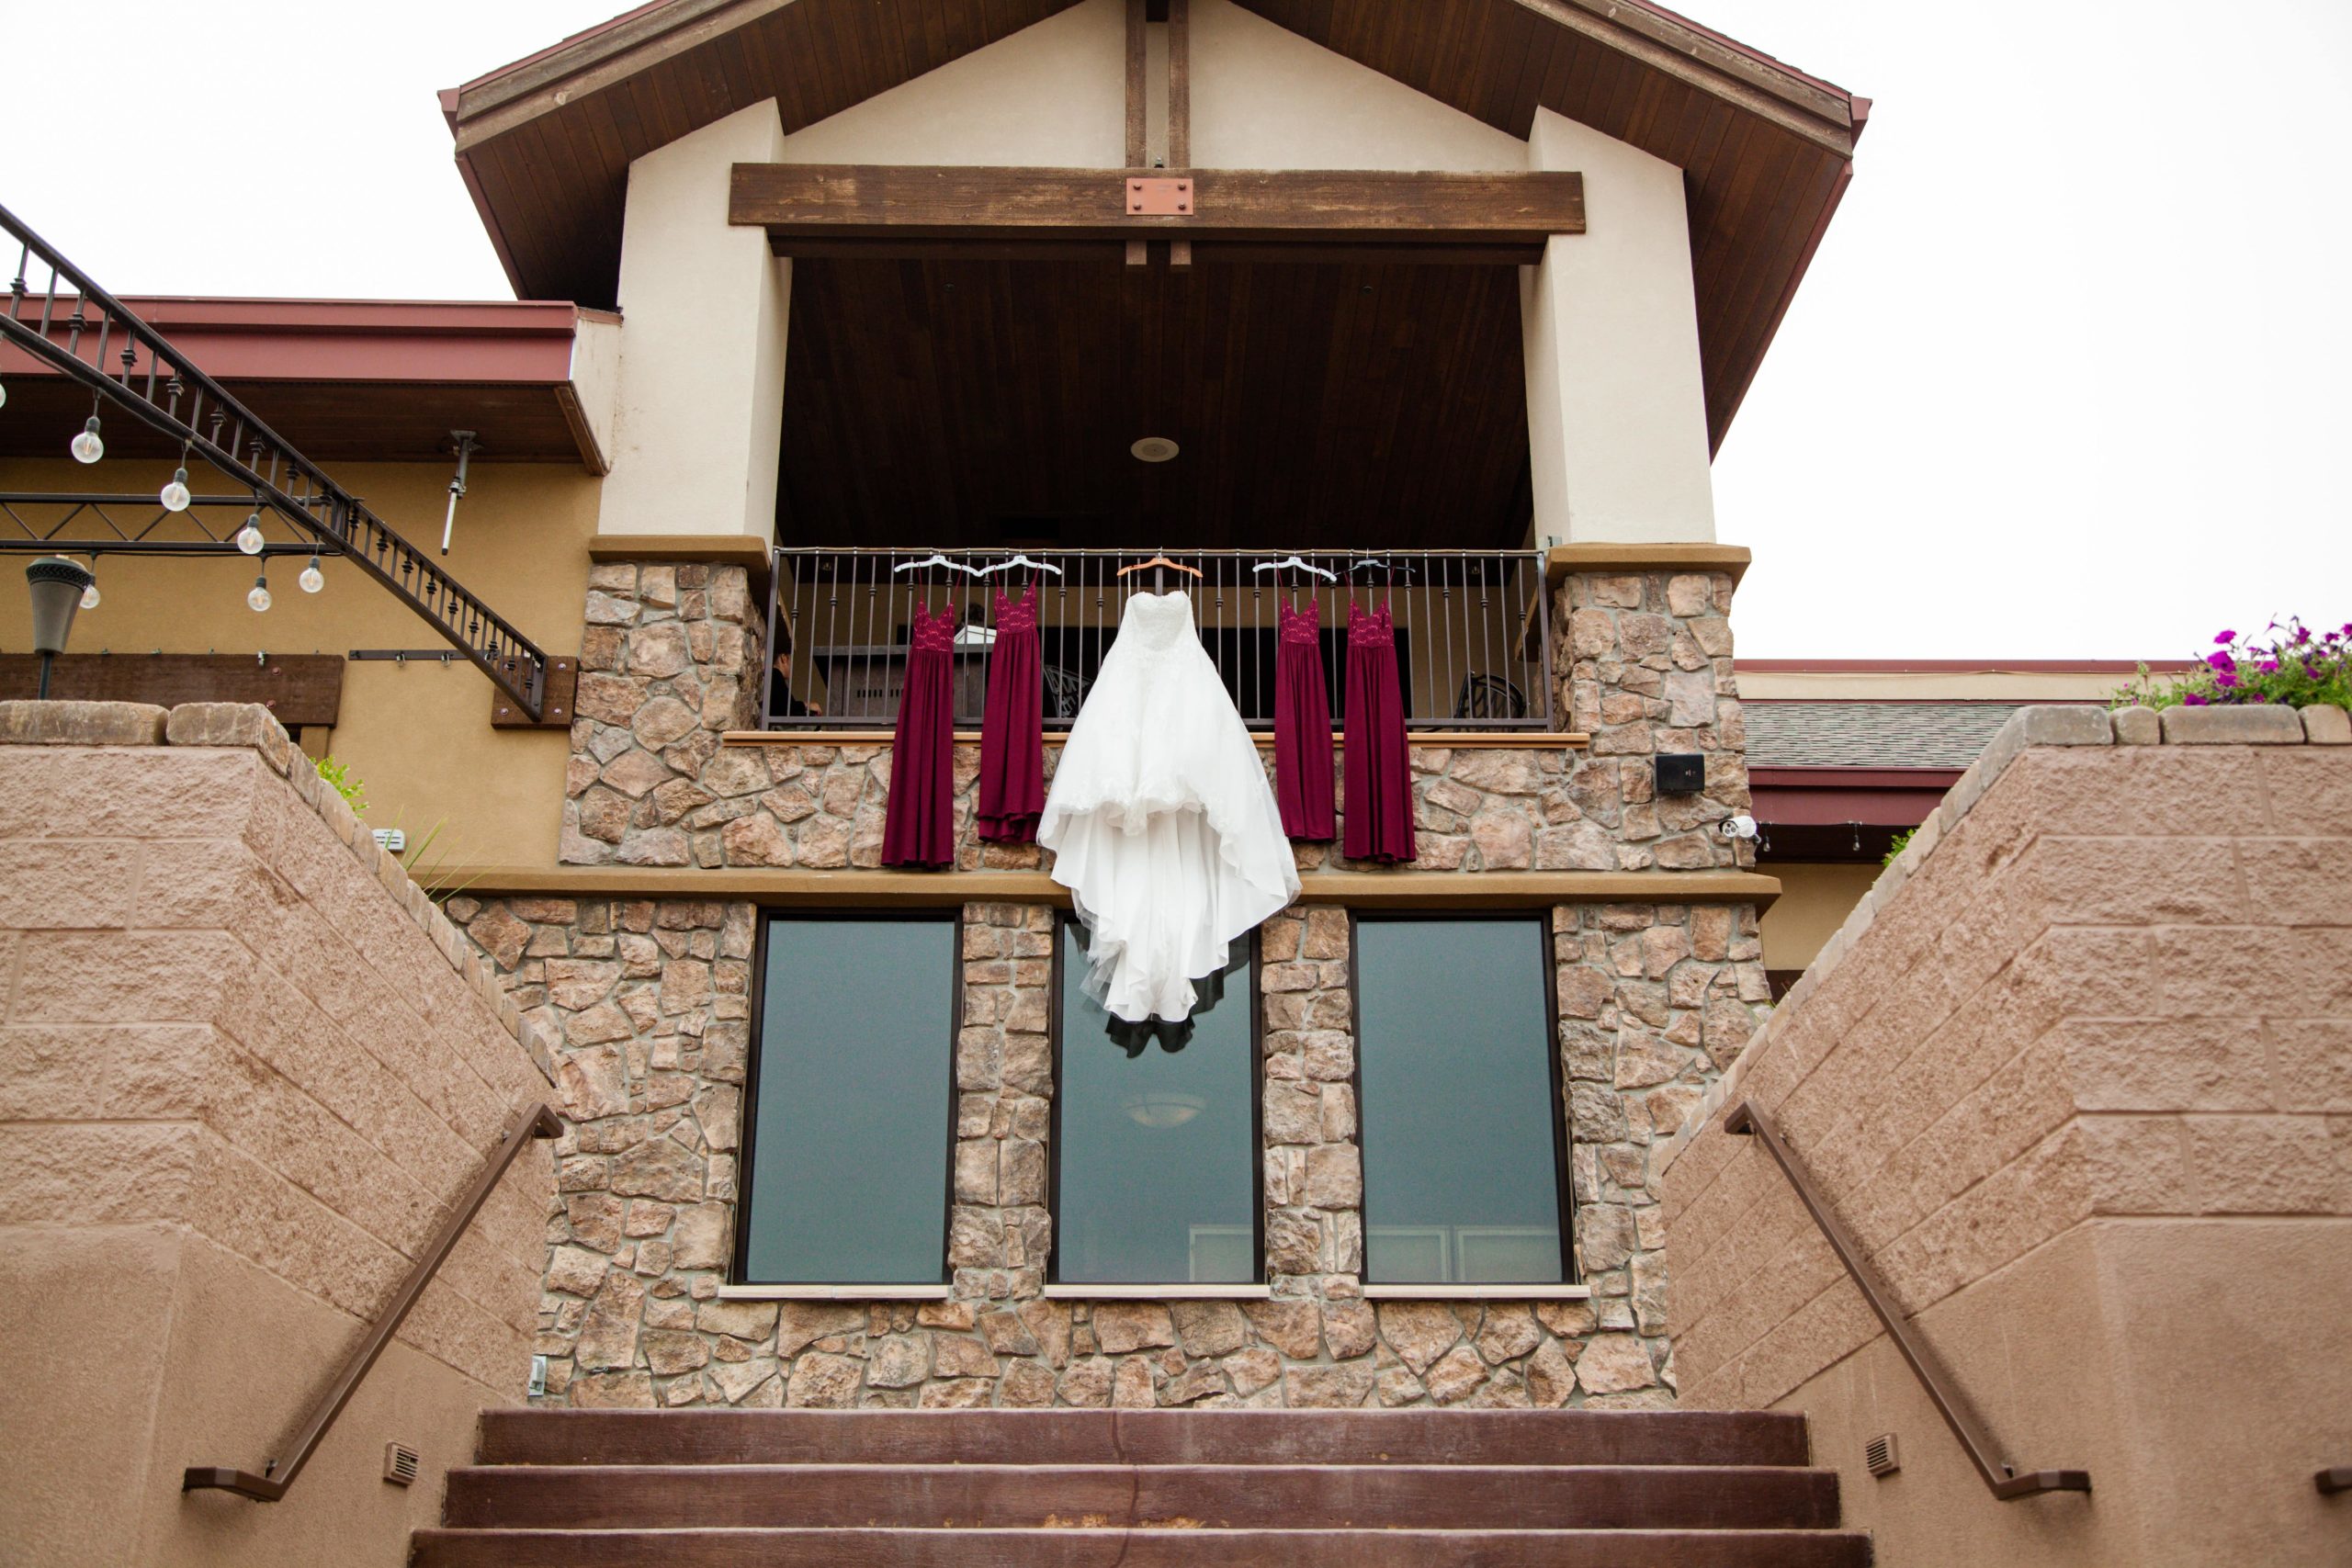 event venue with a wedding dress and bridesmaids dresses hanging on a balcony